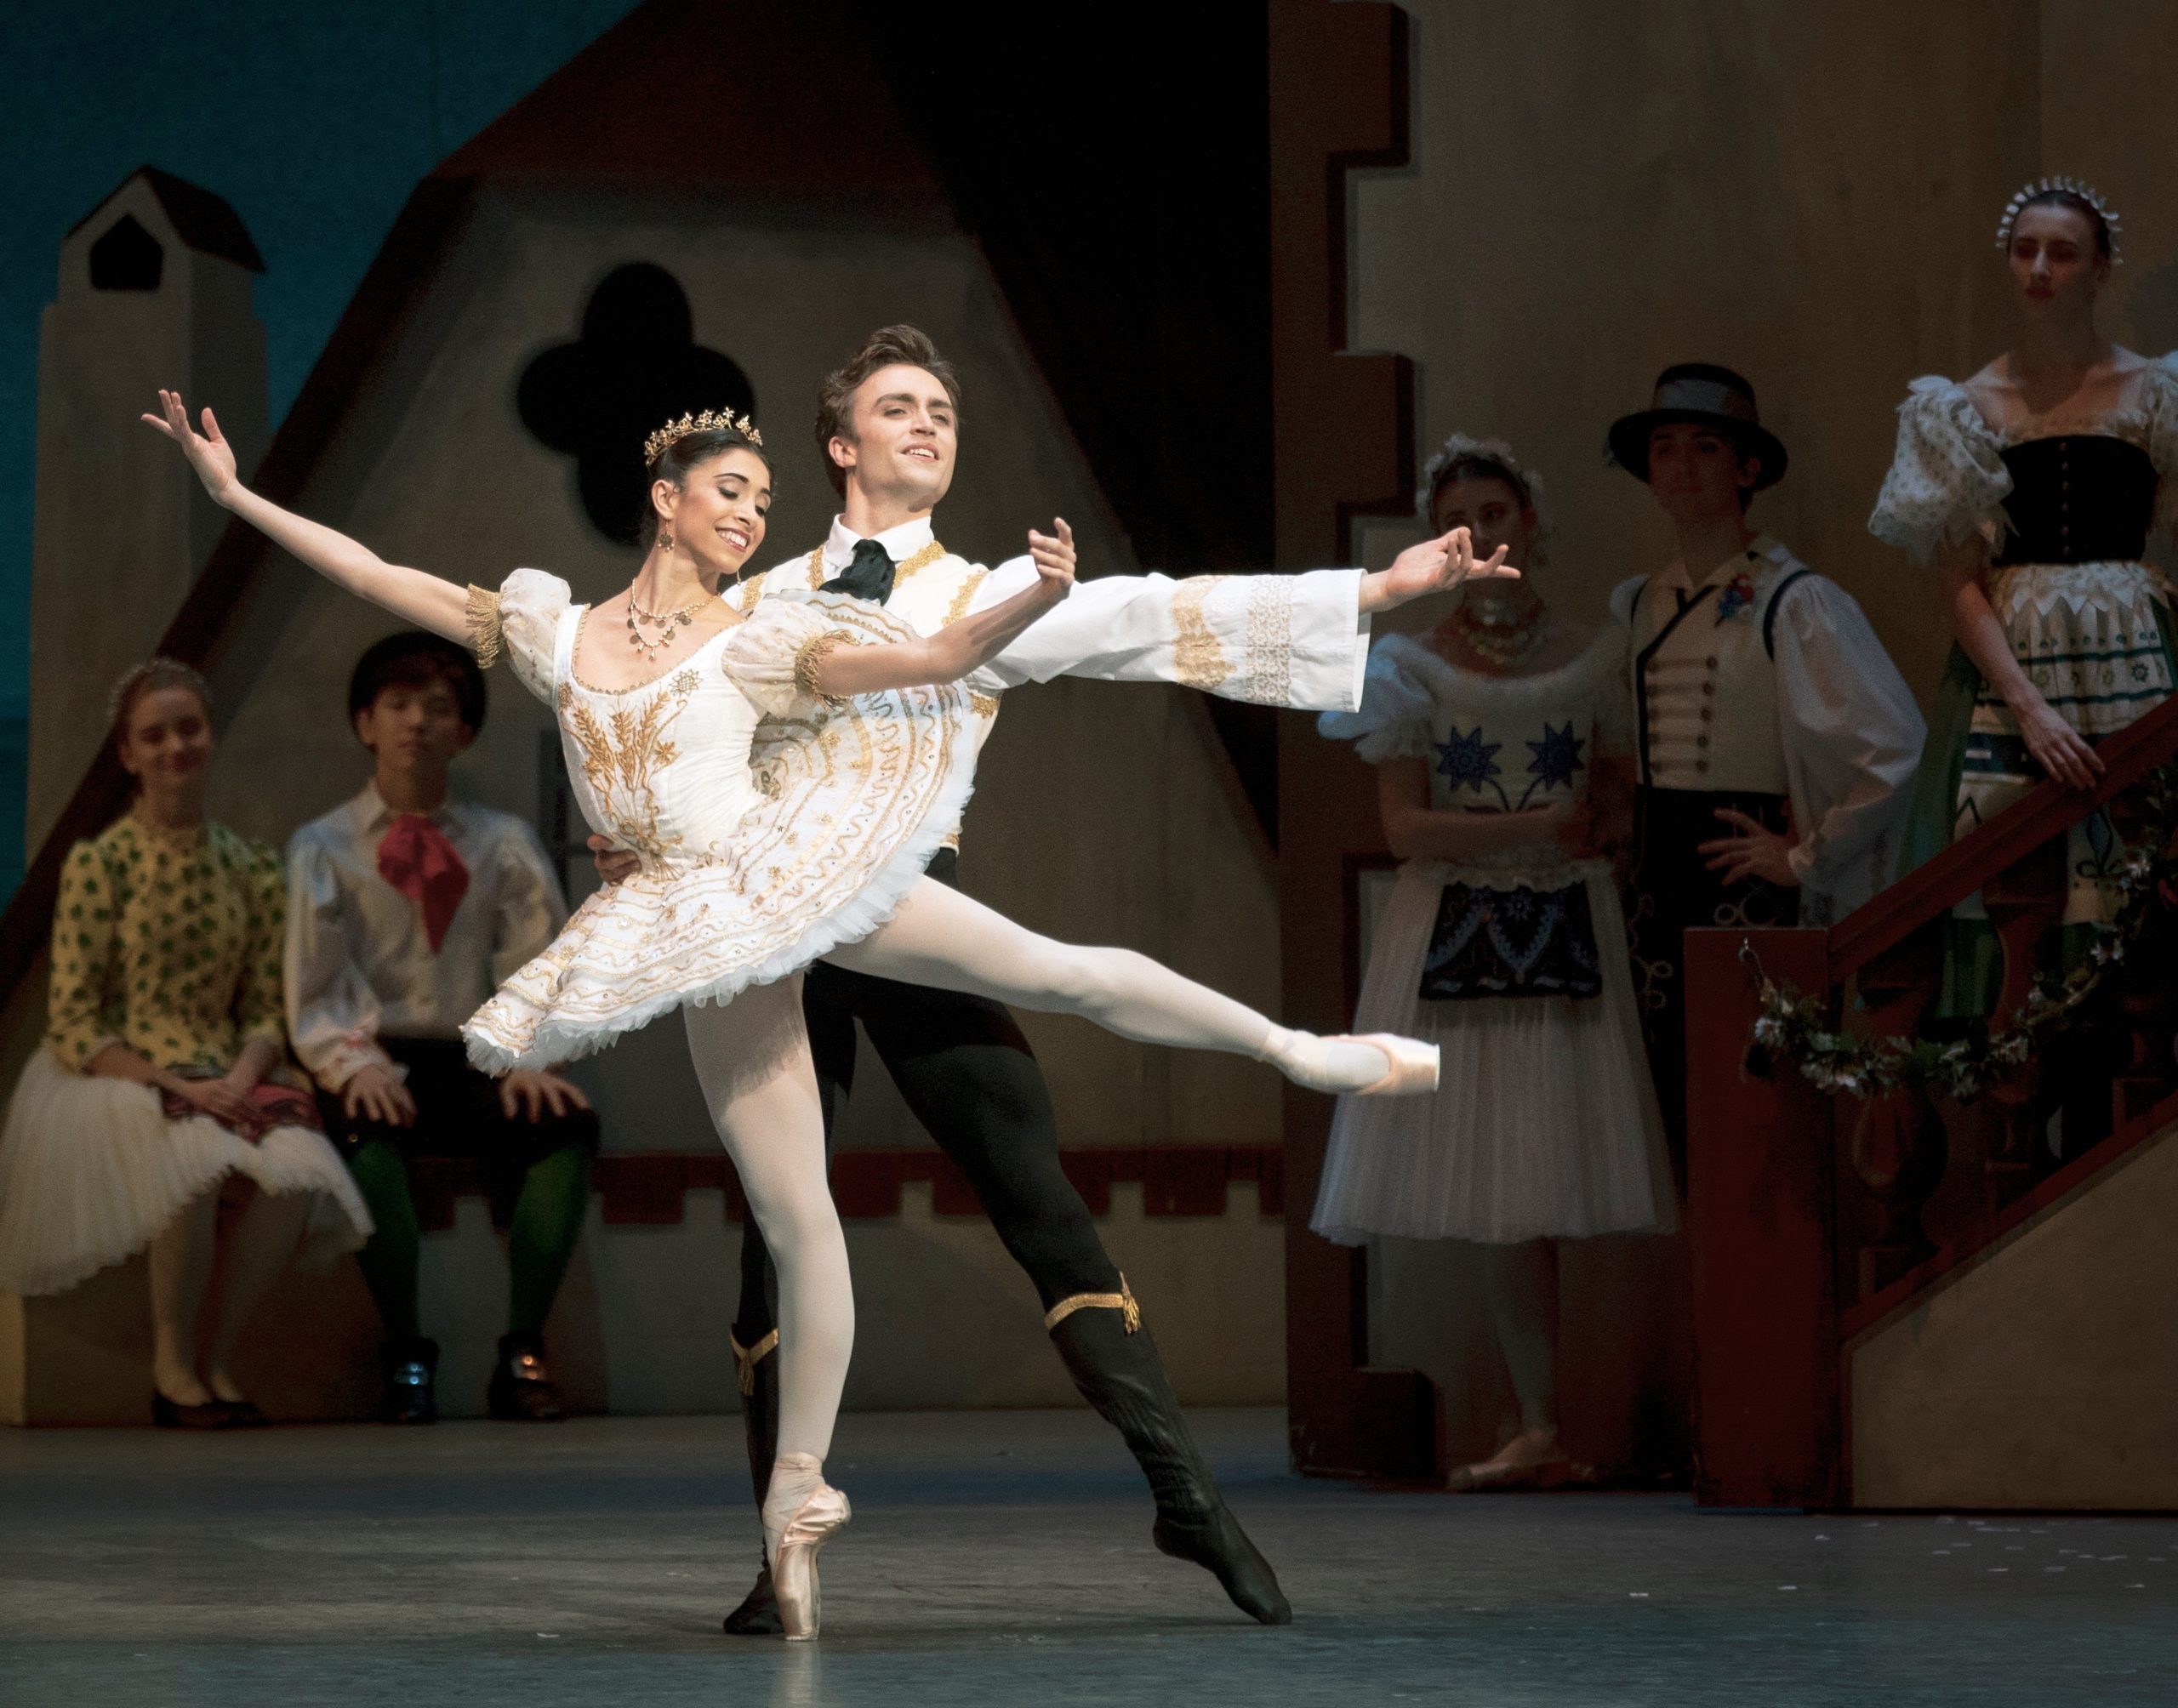 Yasmine Naghdi wearing a white tutu, tiara, pink tights and pointe shoes, poses in a low arabesque and opens her arms to second position. Behind her, Matthew Ballet, in a white shirt, black tights and black ballet boots, holds her waist and points his left foot out in tendu, and holds his left arm out in second. They dance onstage during a village scene, and dancers dressed as townspeople stand behind them watching them dance.